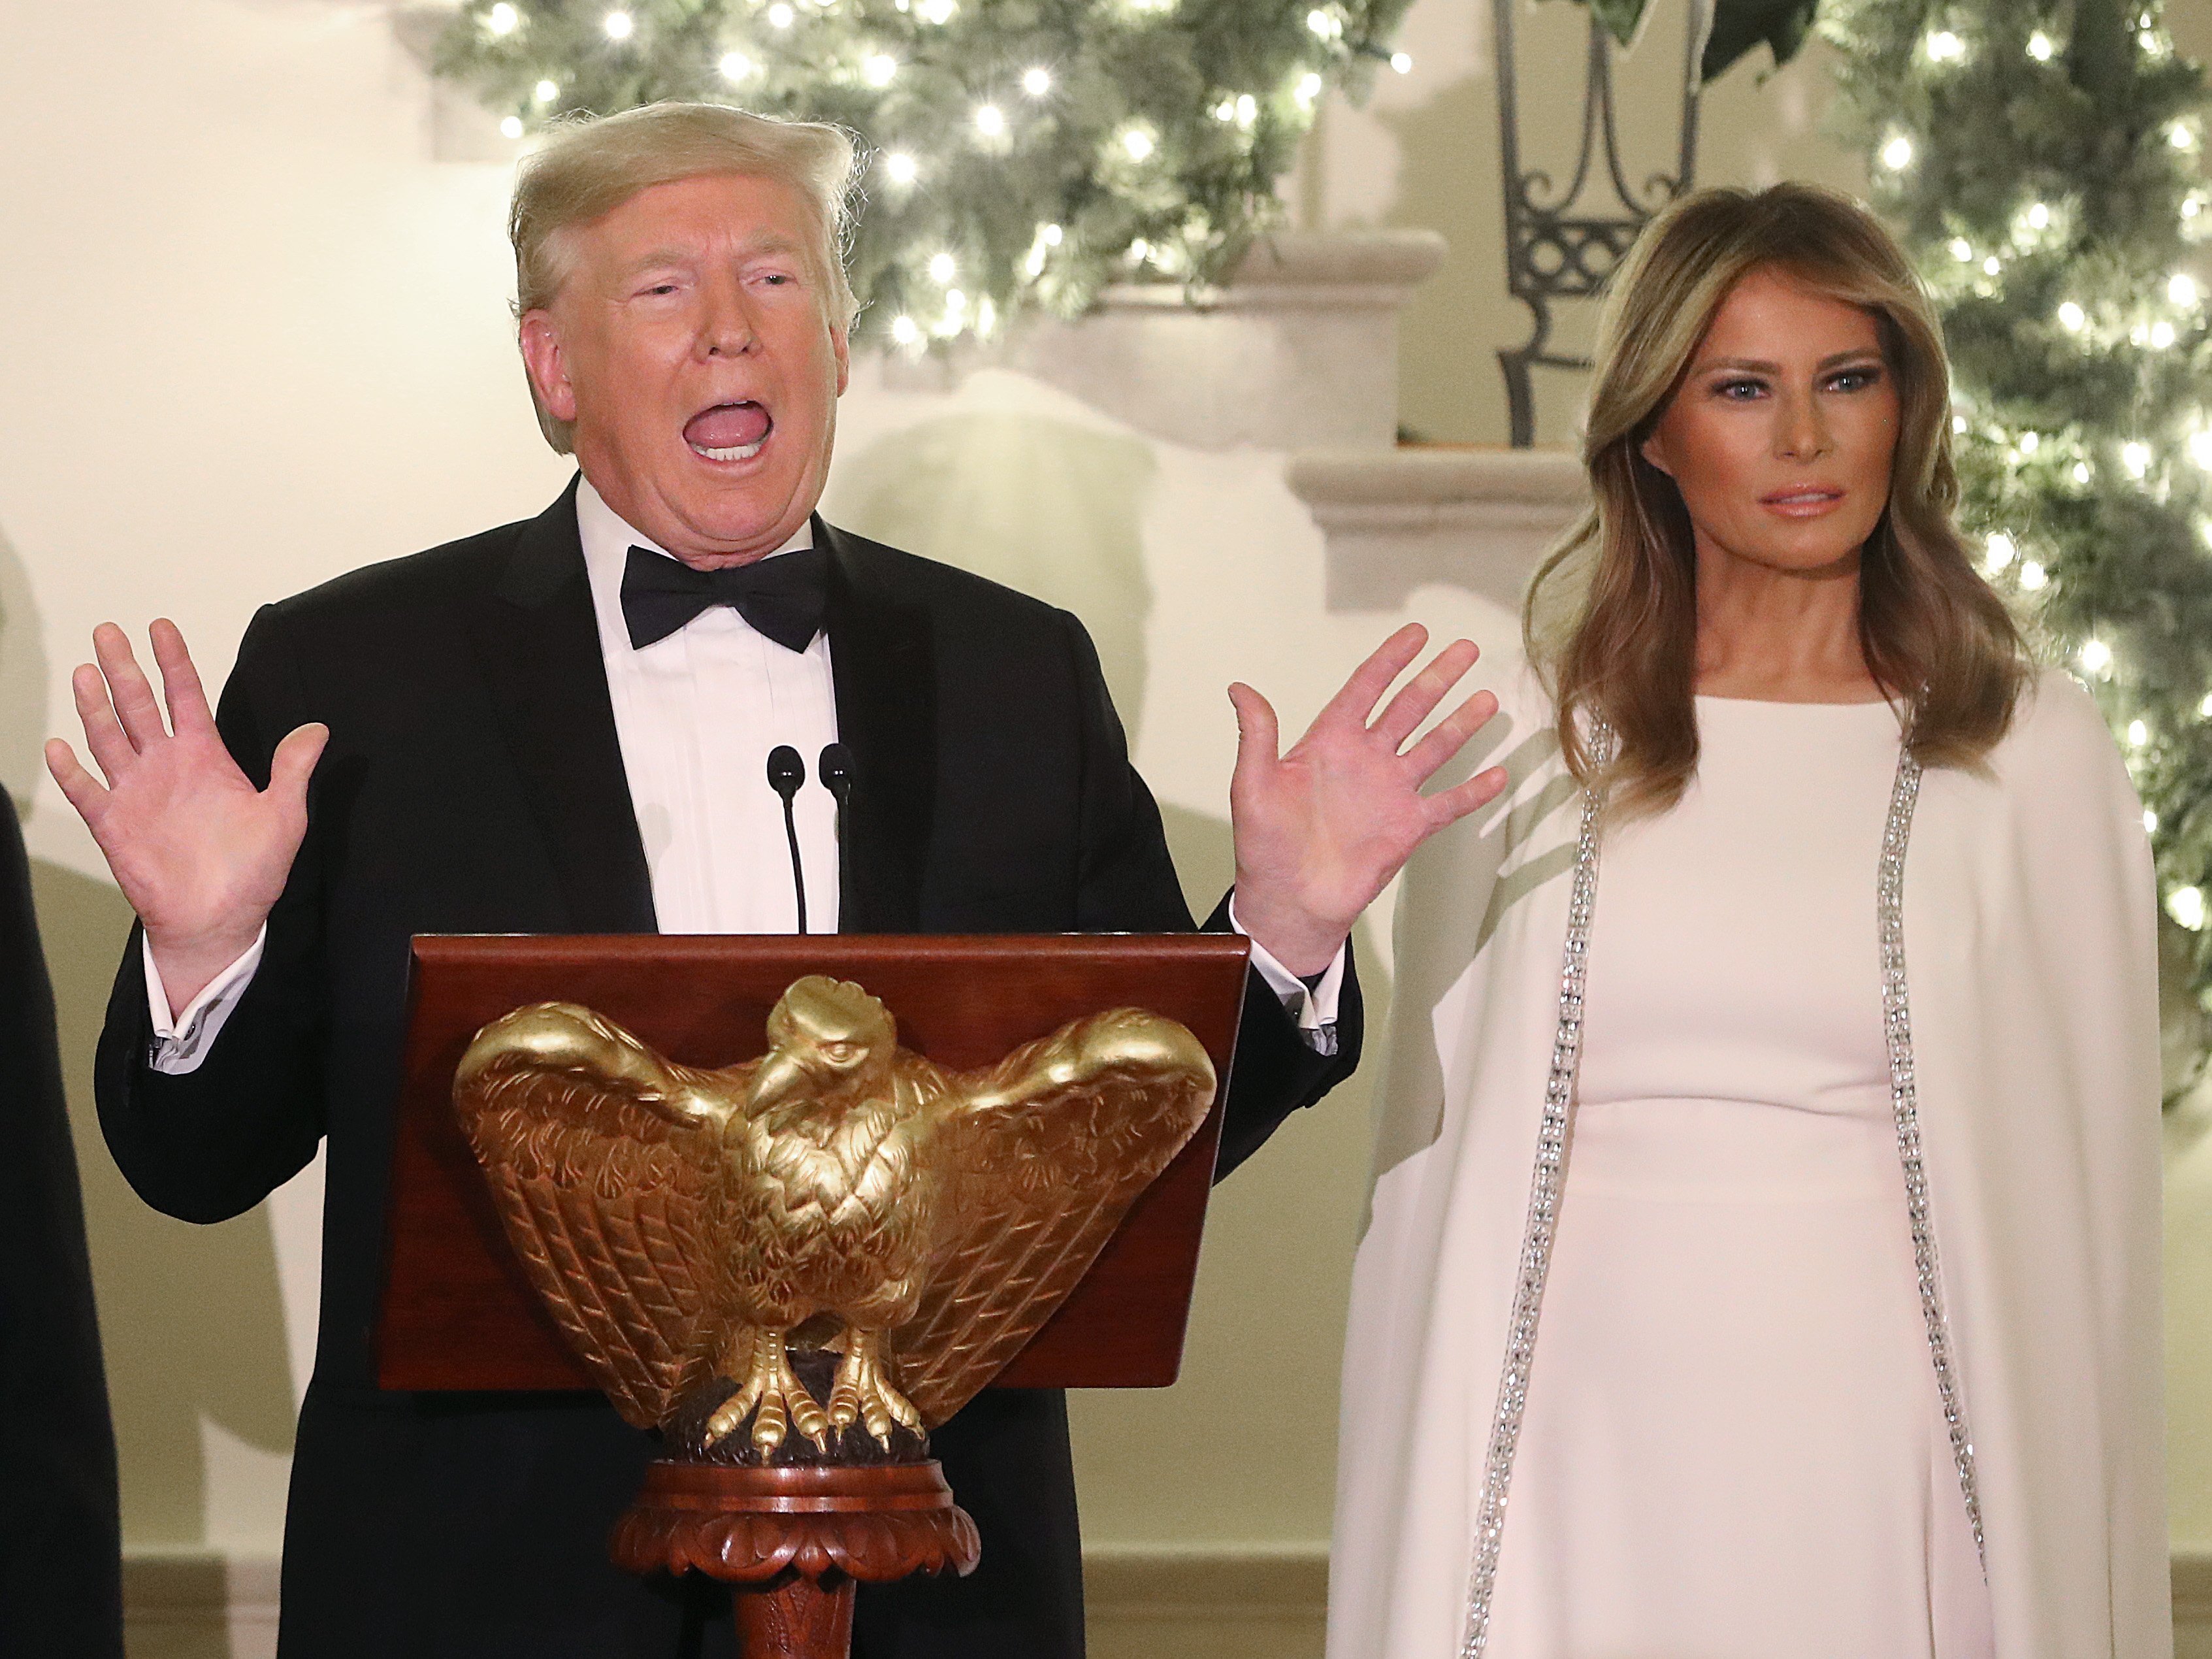 U.S. President Donald Trump speaks as first lady Melania Trump looks during a Congressional Ball in the Grand Foyer of the White House on December 12, 2019 |Photo: Getty Images